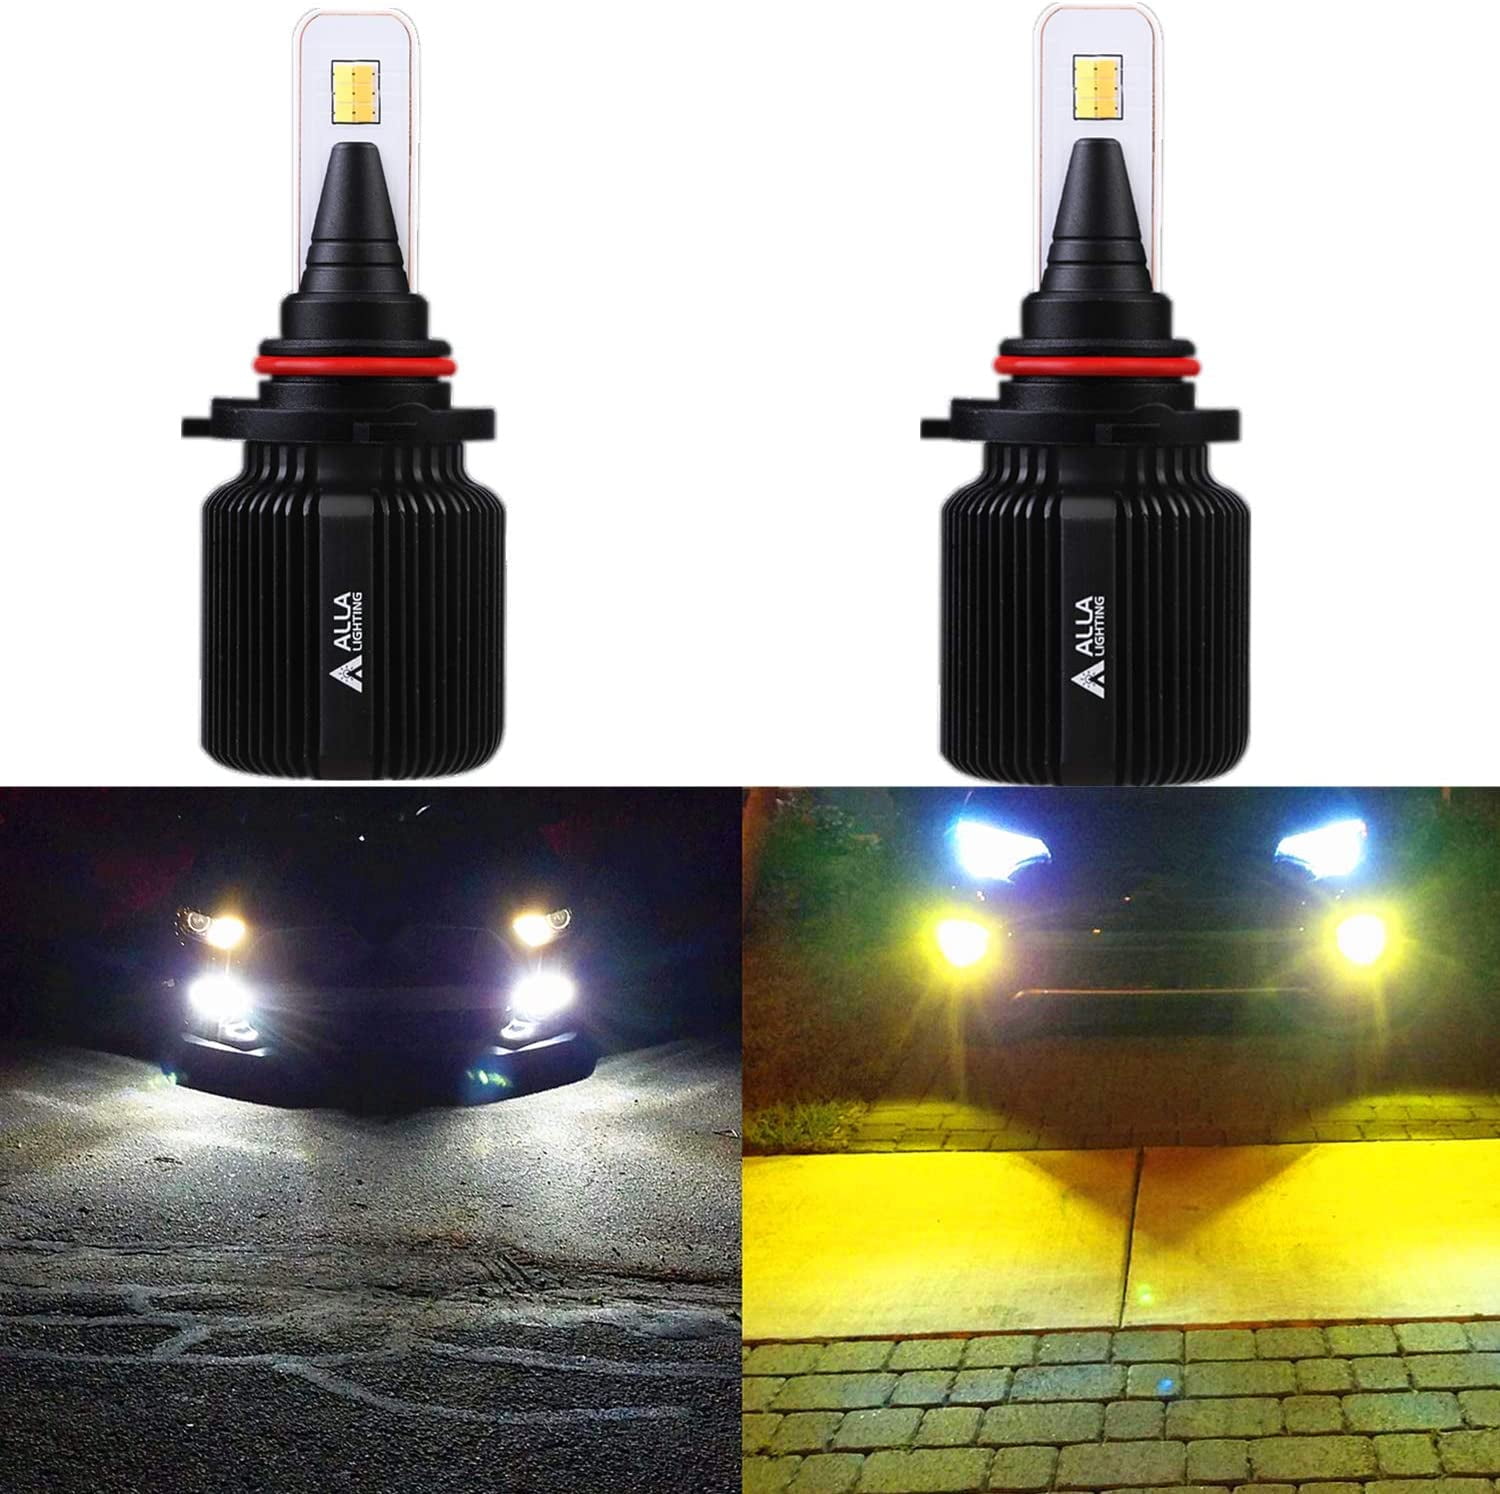 3000K Gold Yellow VehiCode Super Bright 2000 Lumens H10 9140 9145 360 Degree w/Projector Fanless Plug-N-Play Replacement LED Fog Light Bulbs/DRL Conversion Kit High Power COB 2 Pack 